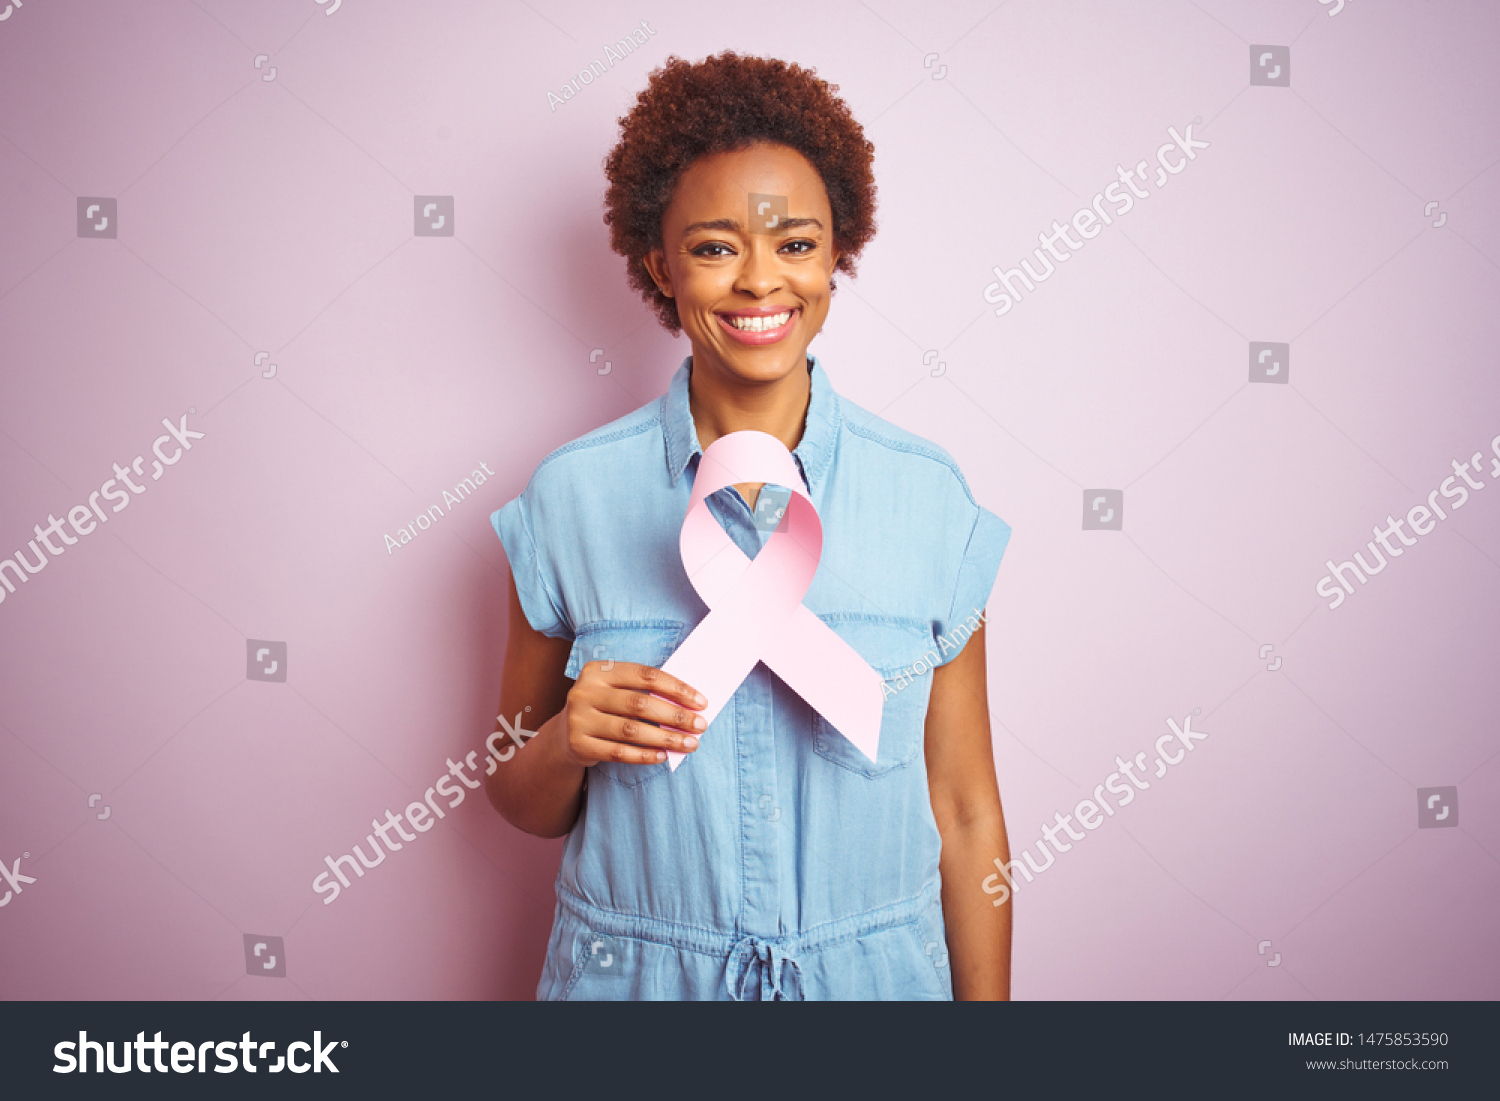 Young african american woman holding brest cancer ribbon over isolated pink background with a happy face standing and smiling with a confident smile showing teeth #1475853590